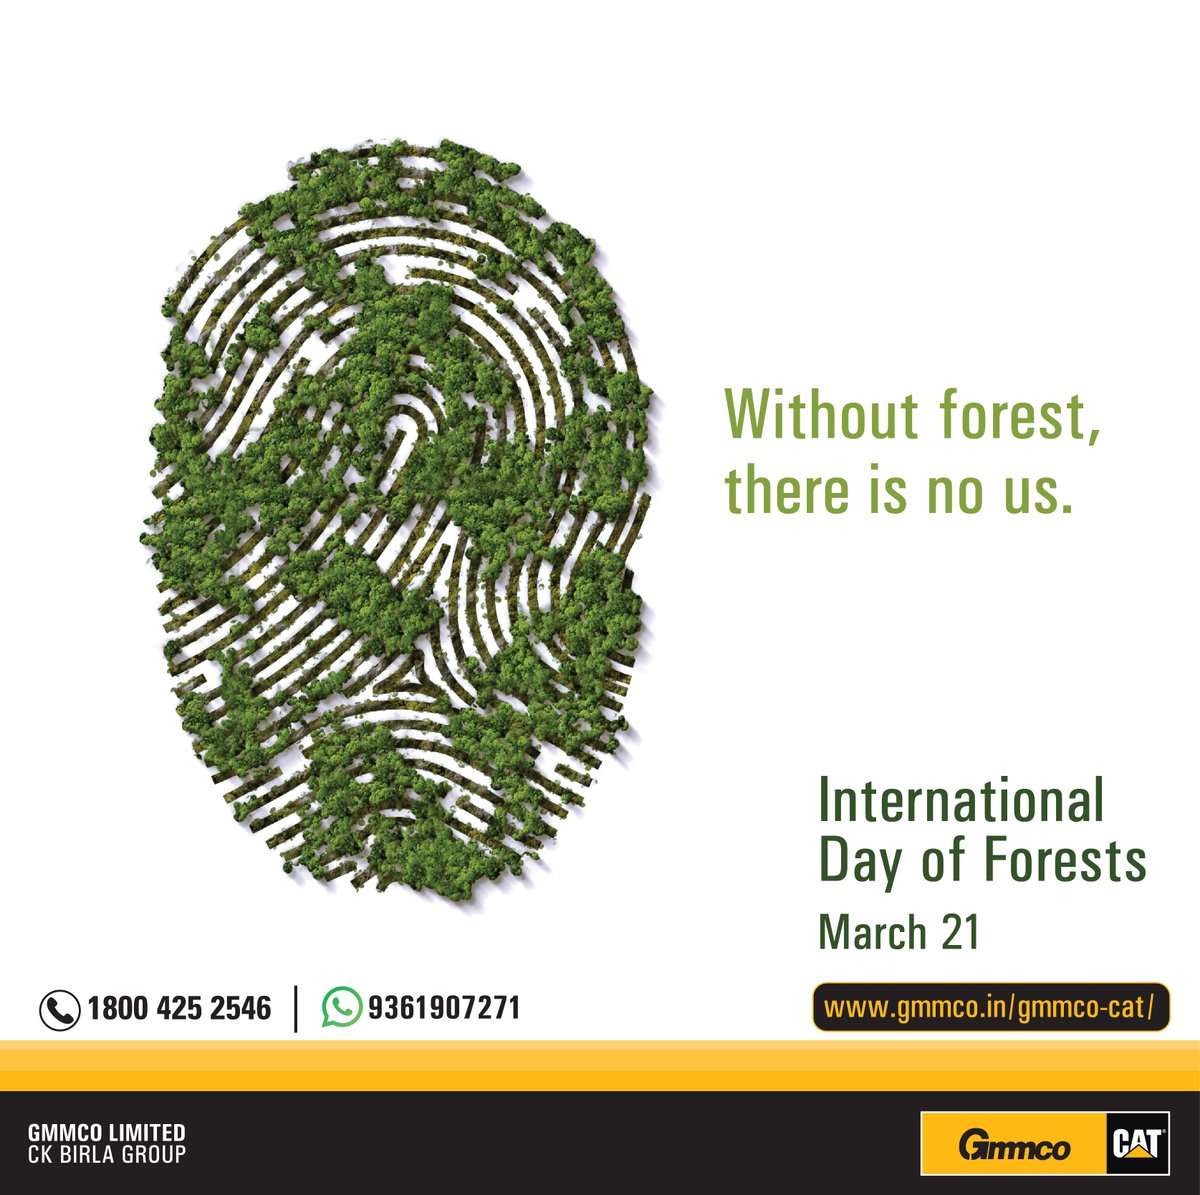 Forests are vital to life on earth. They purify the air we breathe, filter the water we drink, & act as an important buffer against climate change. On this International Day of Forests, let us recommit to conserve & sustainably use forests. 
#InternationalDayofForests https://t.co/dKvPxagvrh